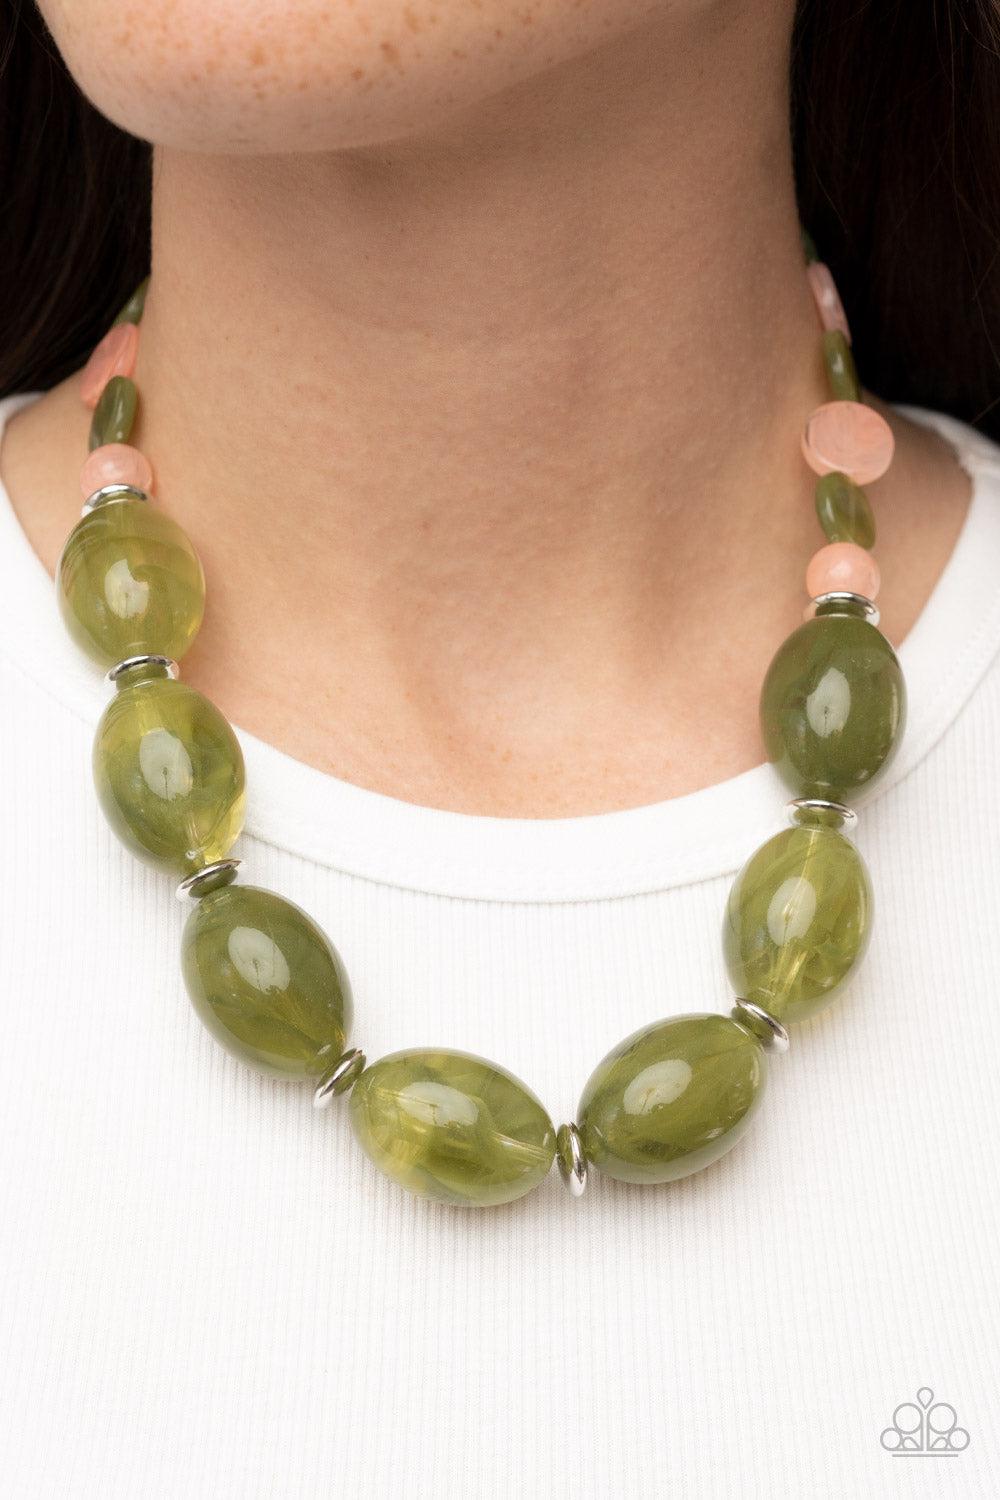 Belle of the Beach Green Acrylic Necklace - Paparazzi Accessories-on model - CarasShop.com - $5 Jewelry by Cara Jewels